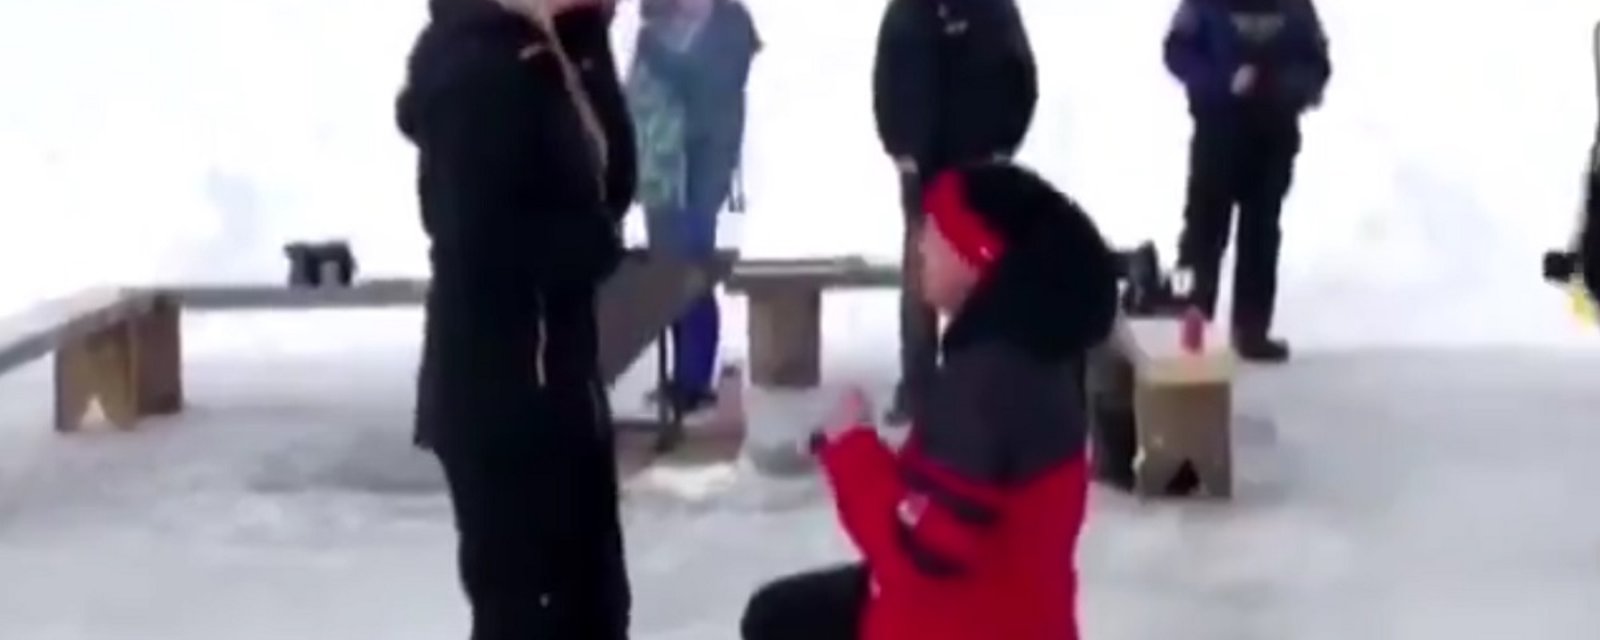 Young man proposes on outdoor rink in most Canadian proposal ever!